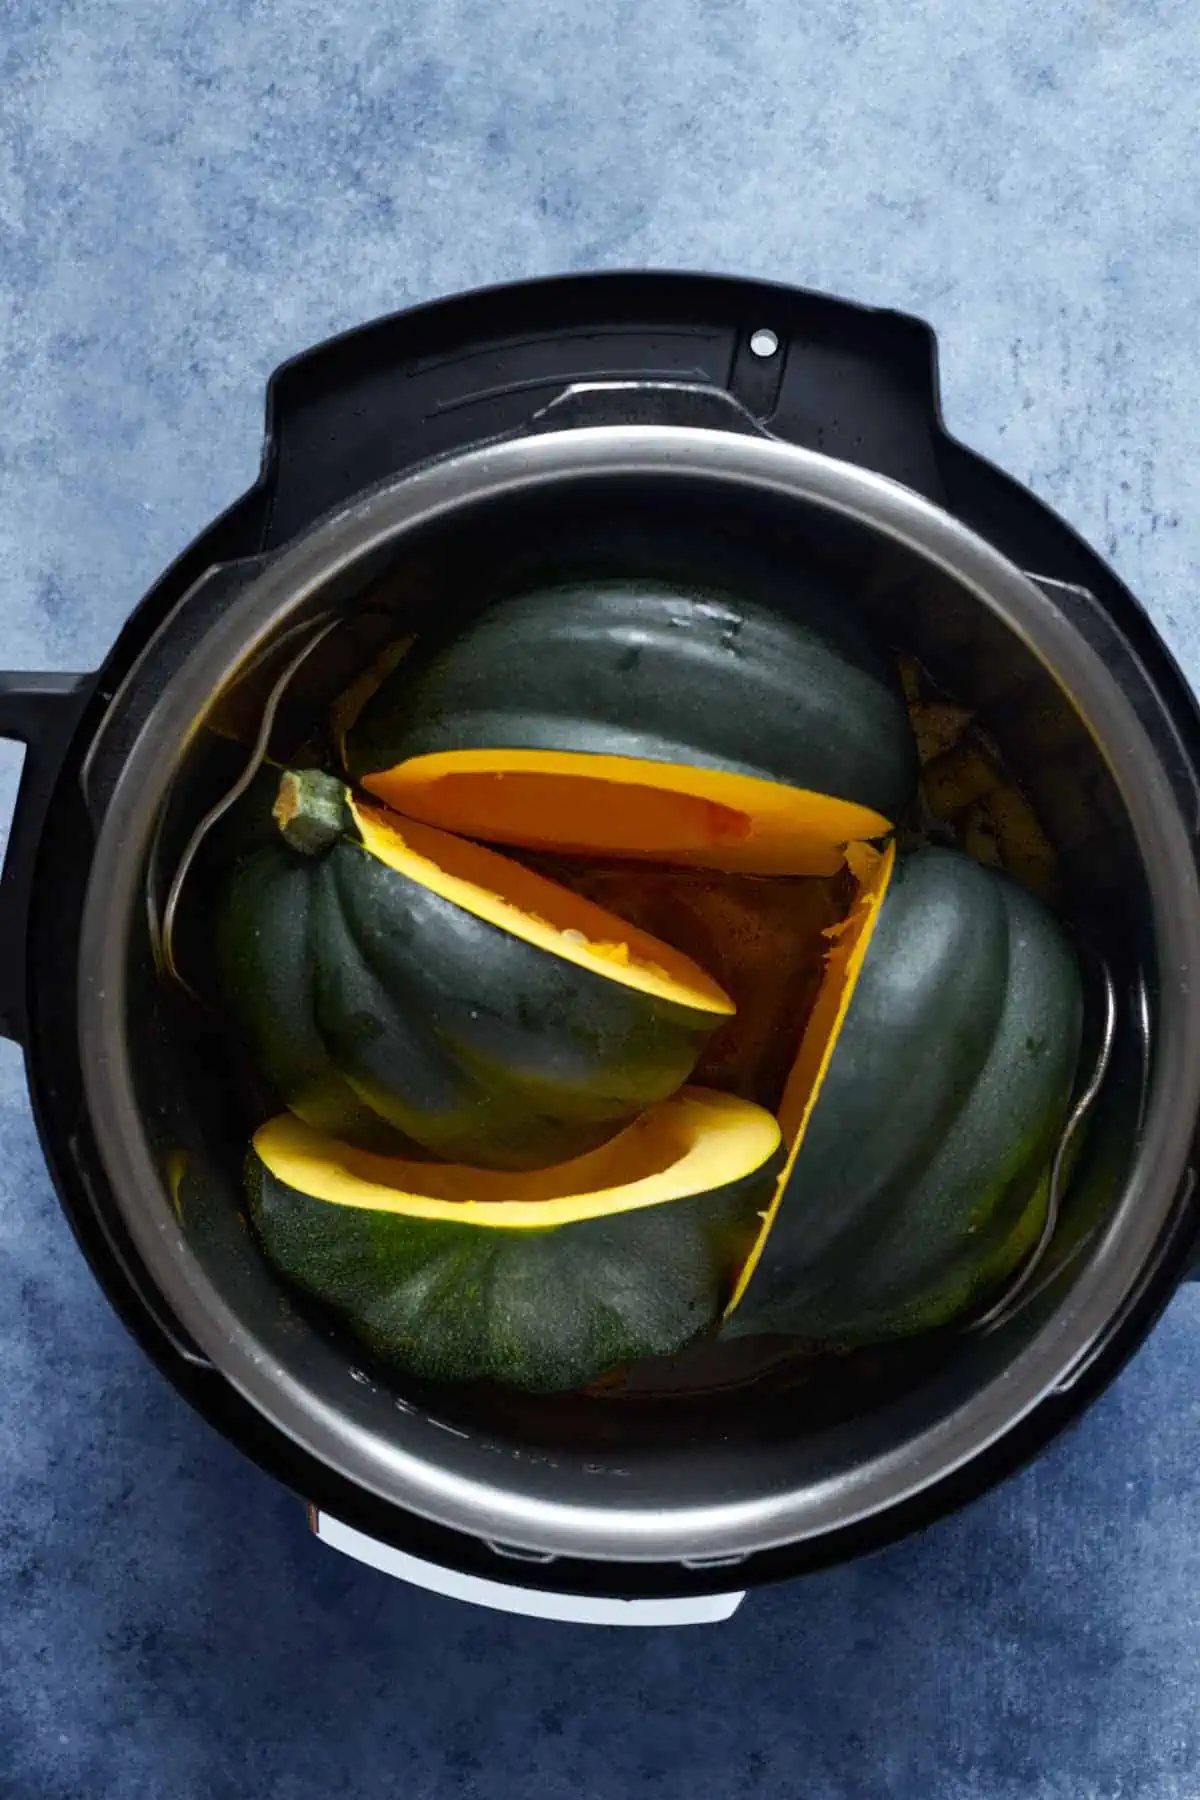 Before cooking the acorn squash in the instant pot